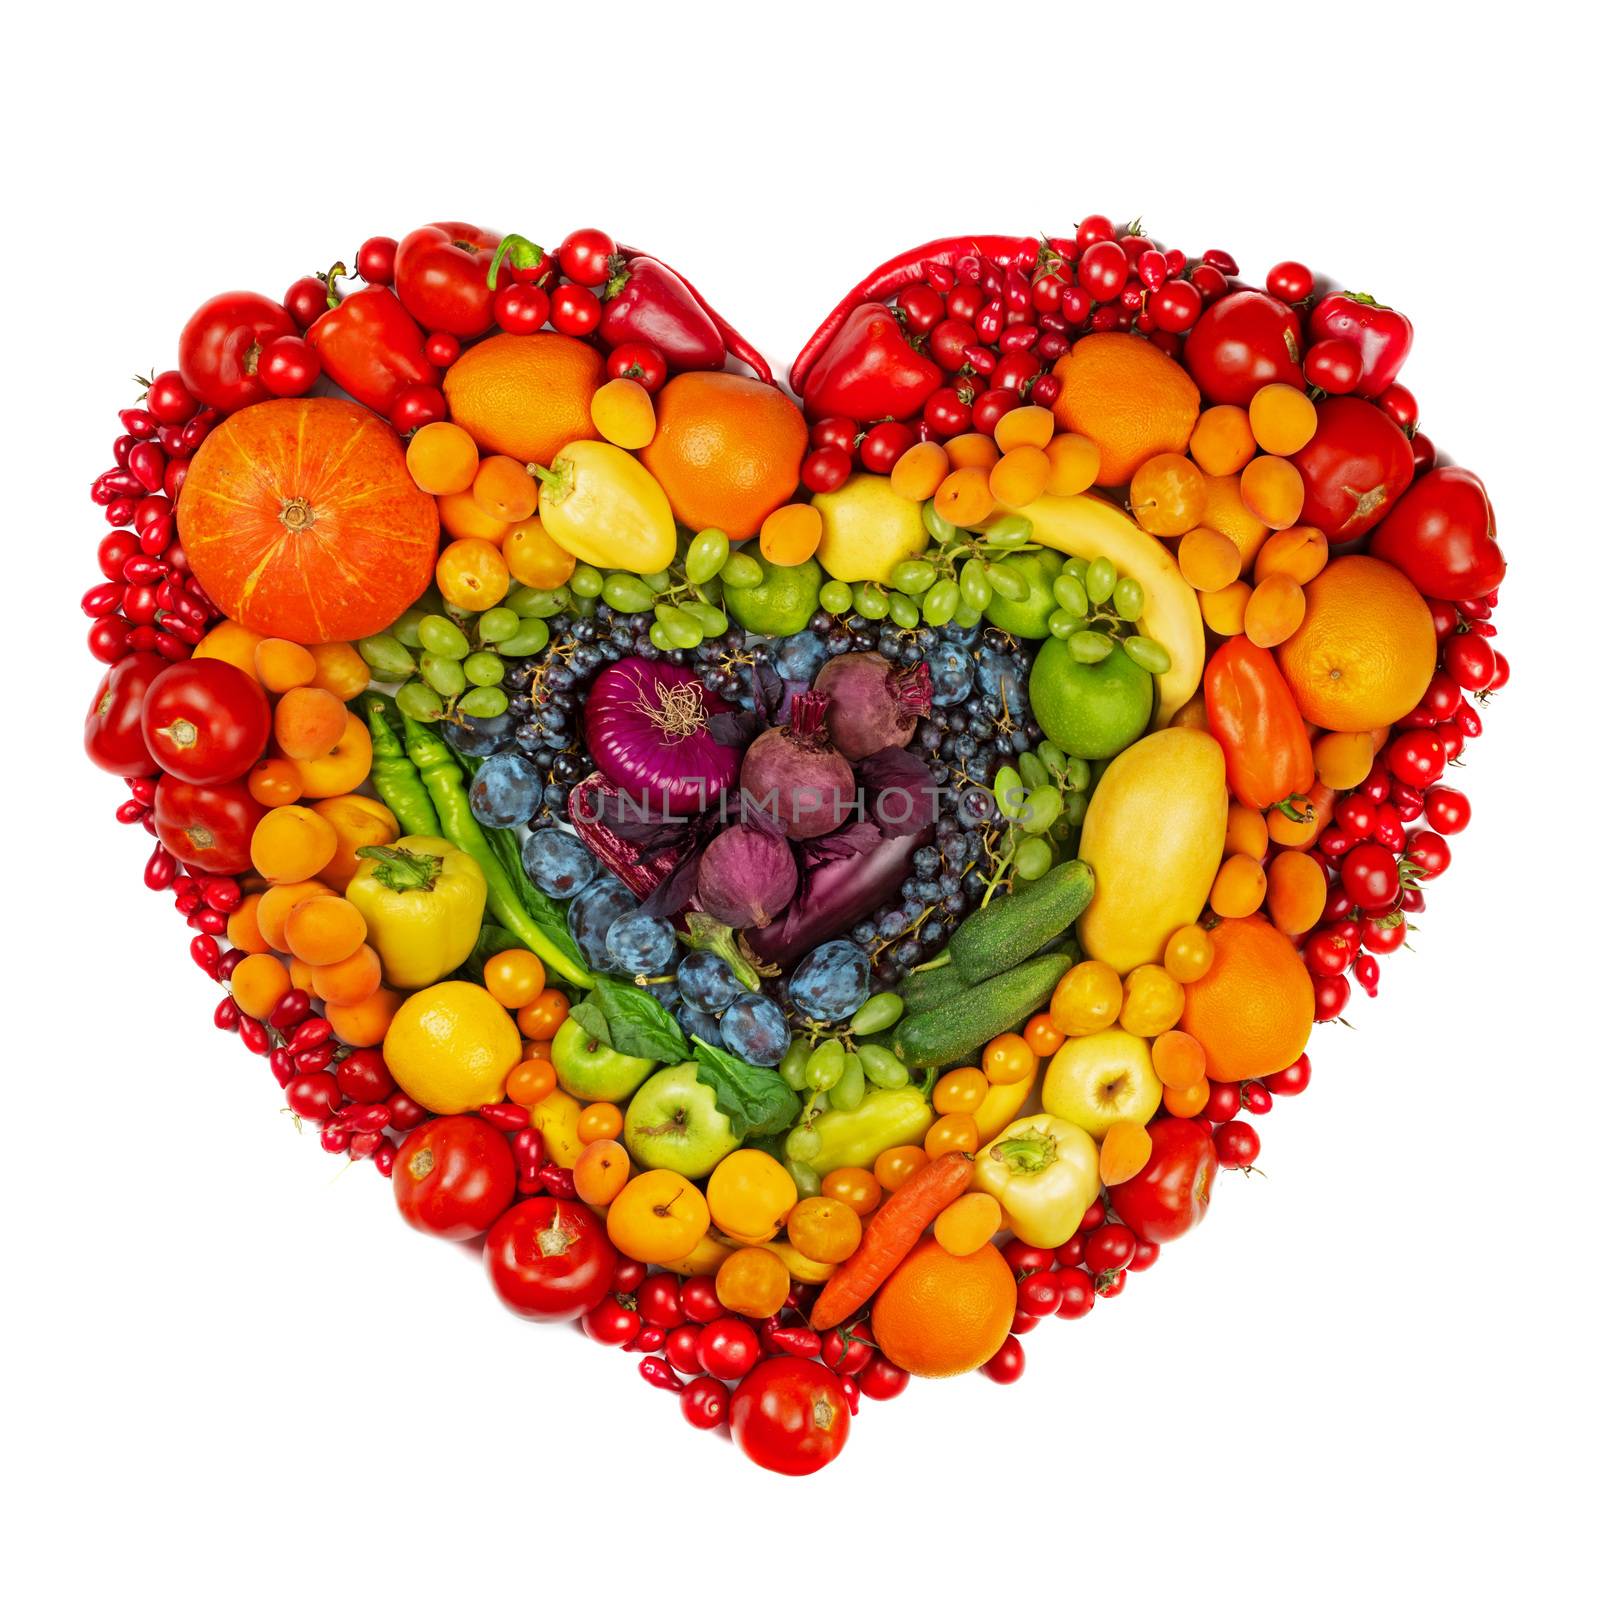 Rainbow heart of fruits and vegetables by destillat